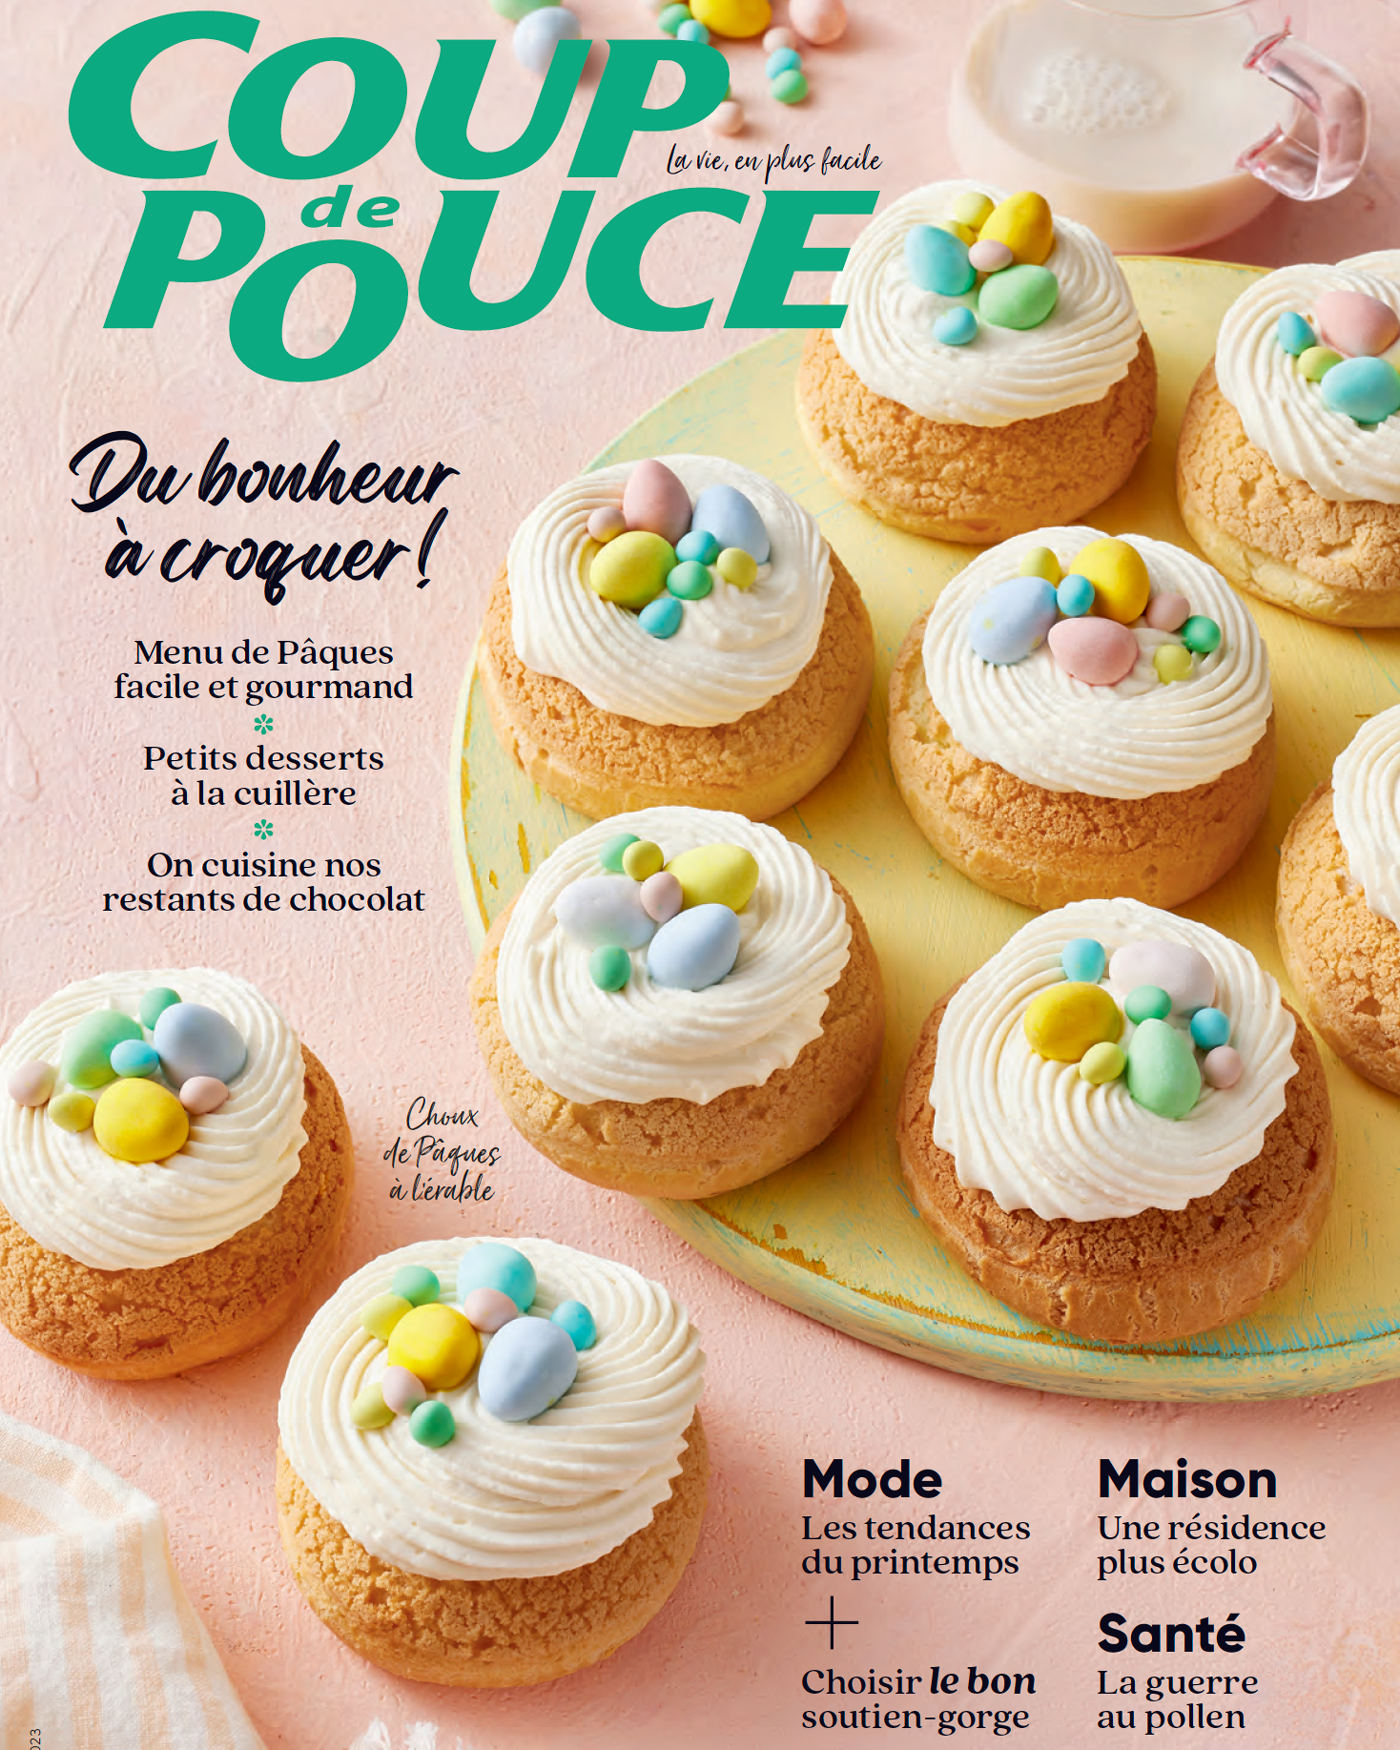 Editorial Food Photography for Coup de pouce Magazine